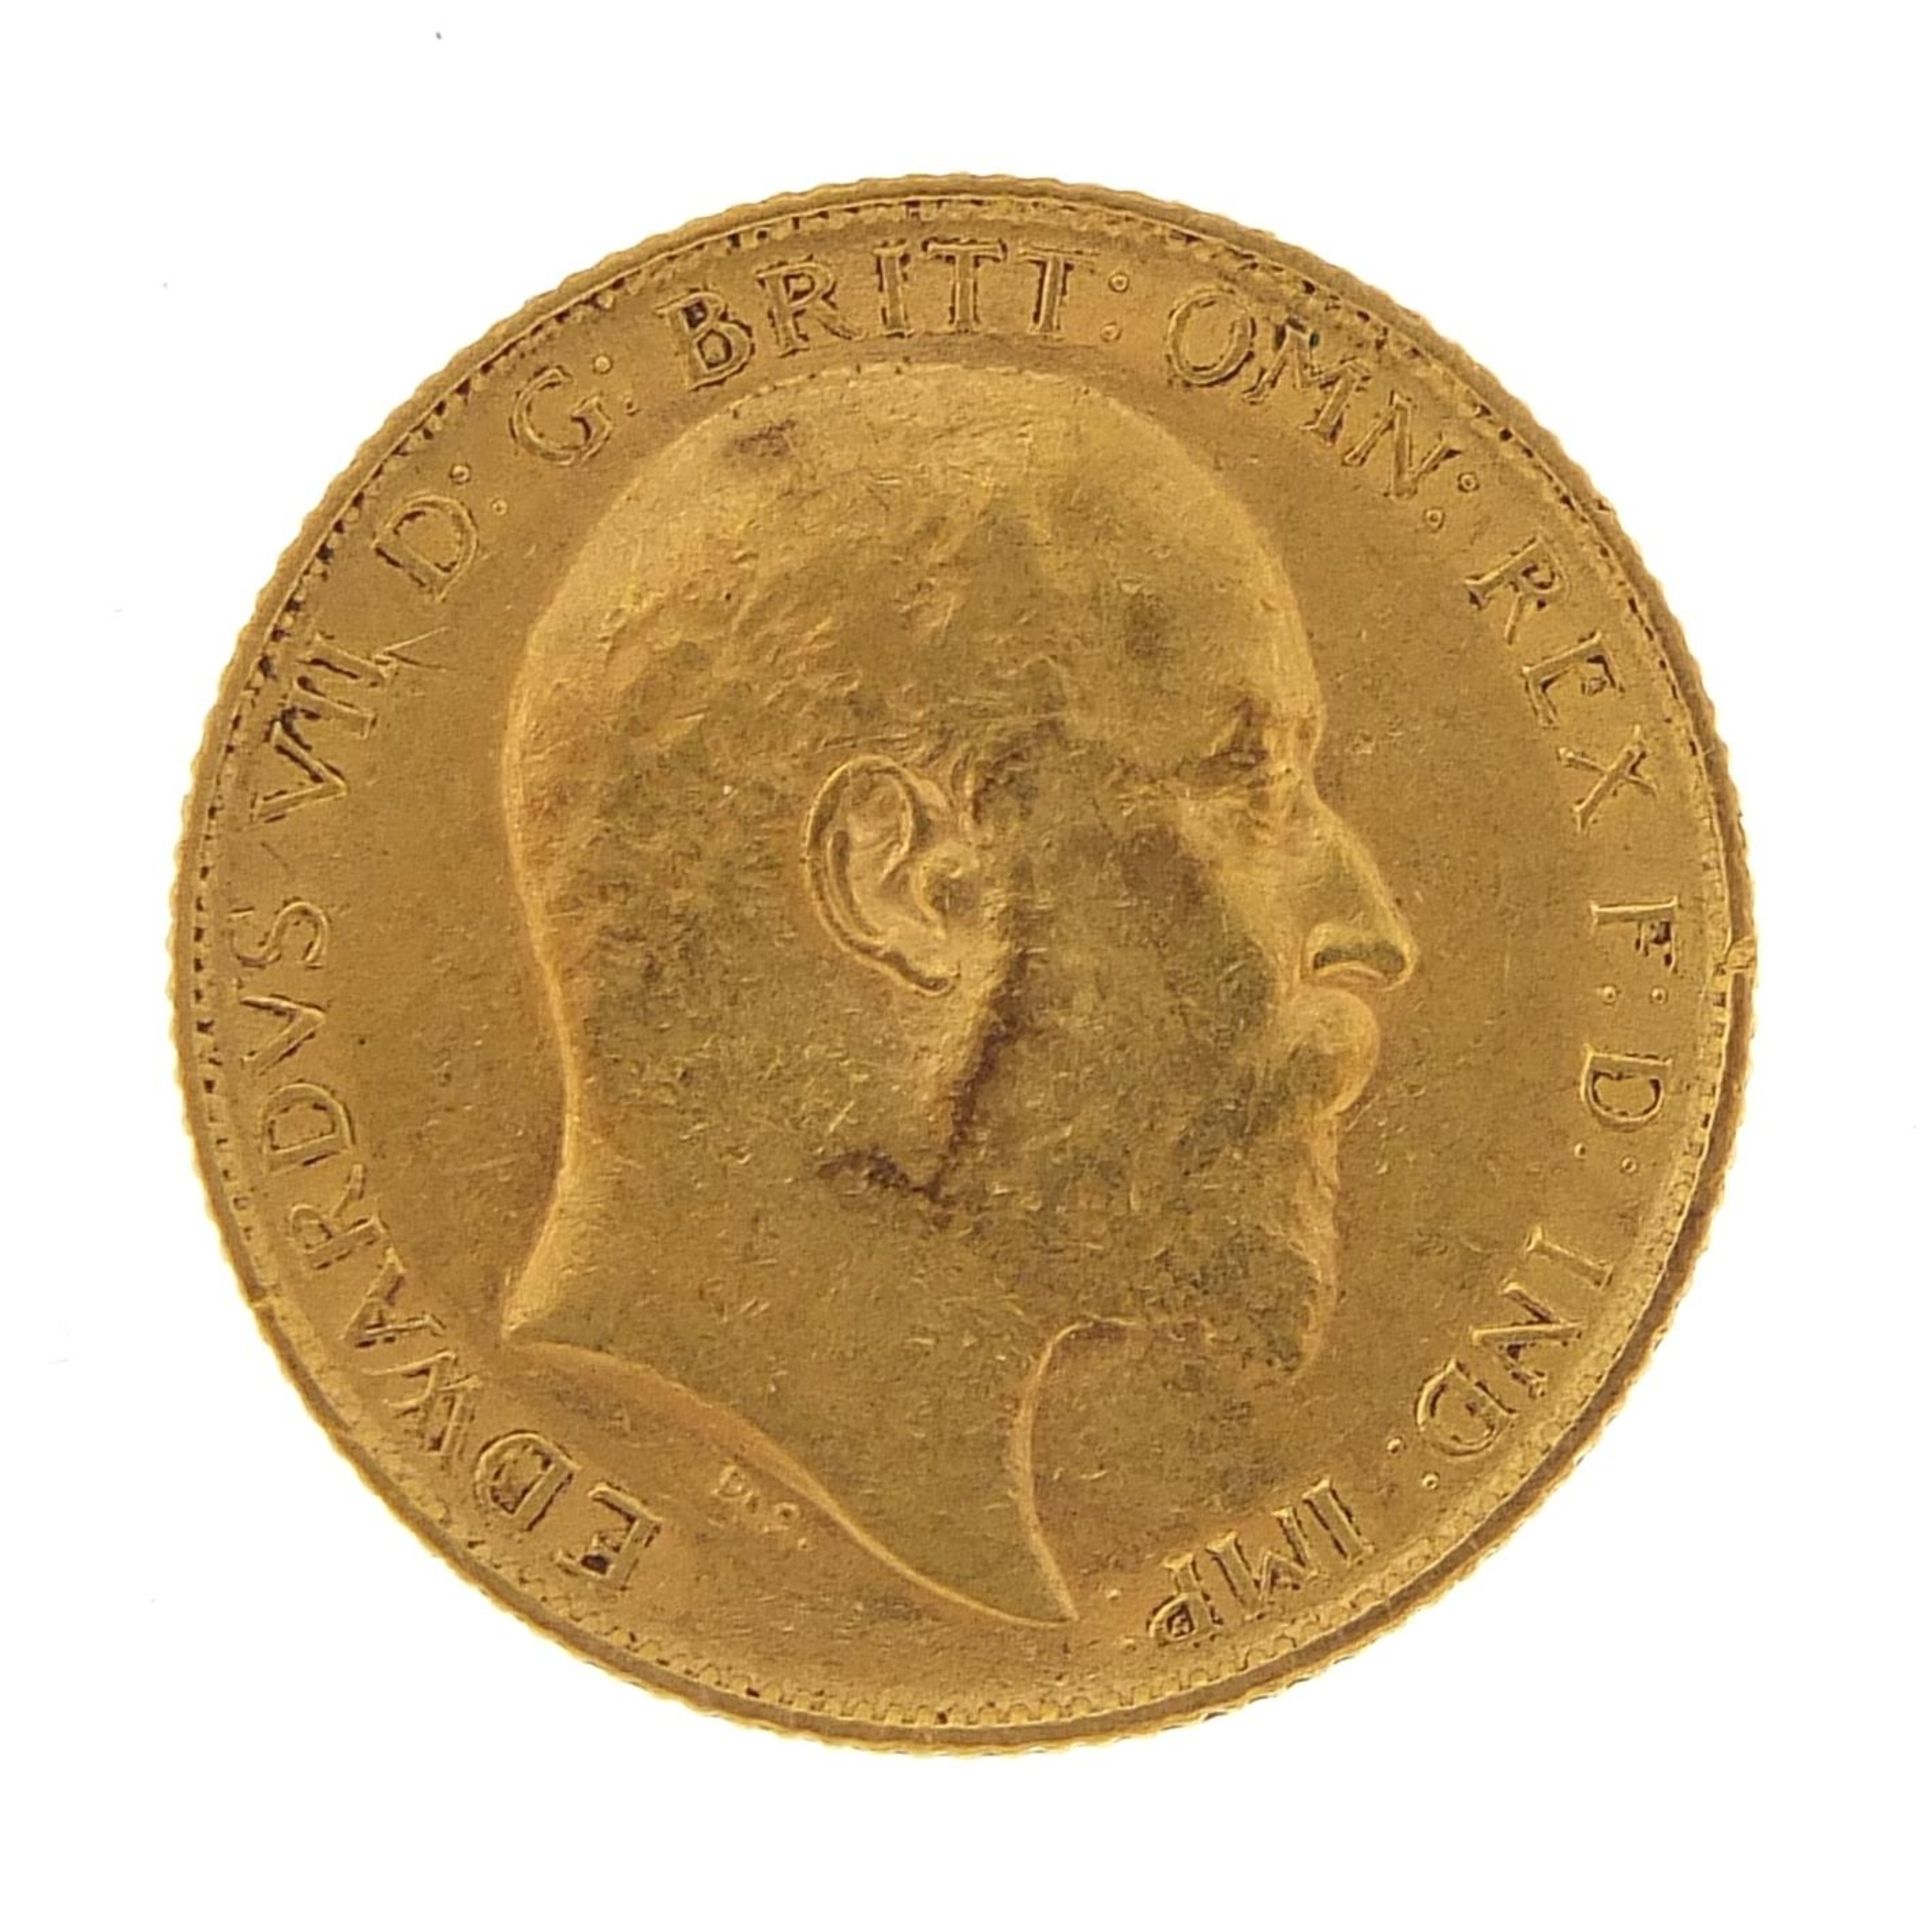 Edward VII 1910 gold half sovereign - this lot is sold without buyer's premium - Image 2 of 3